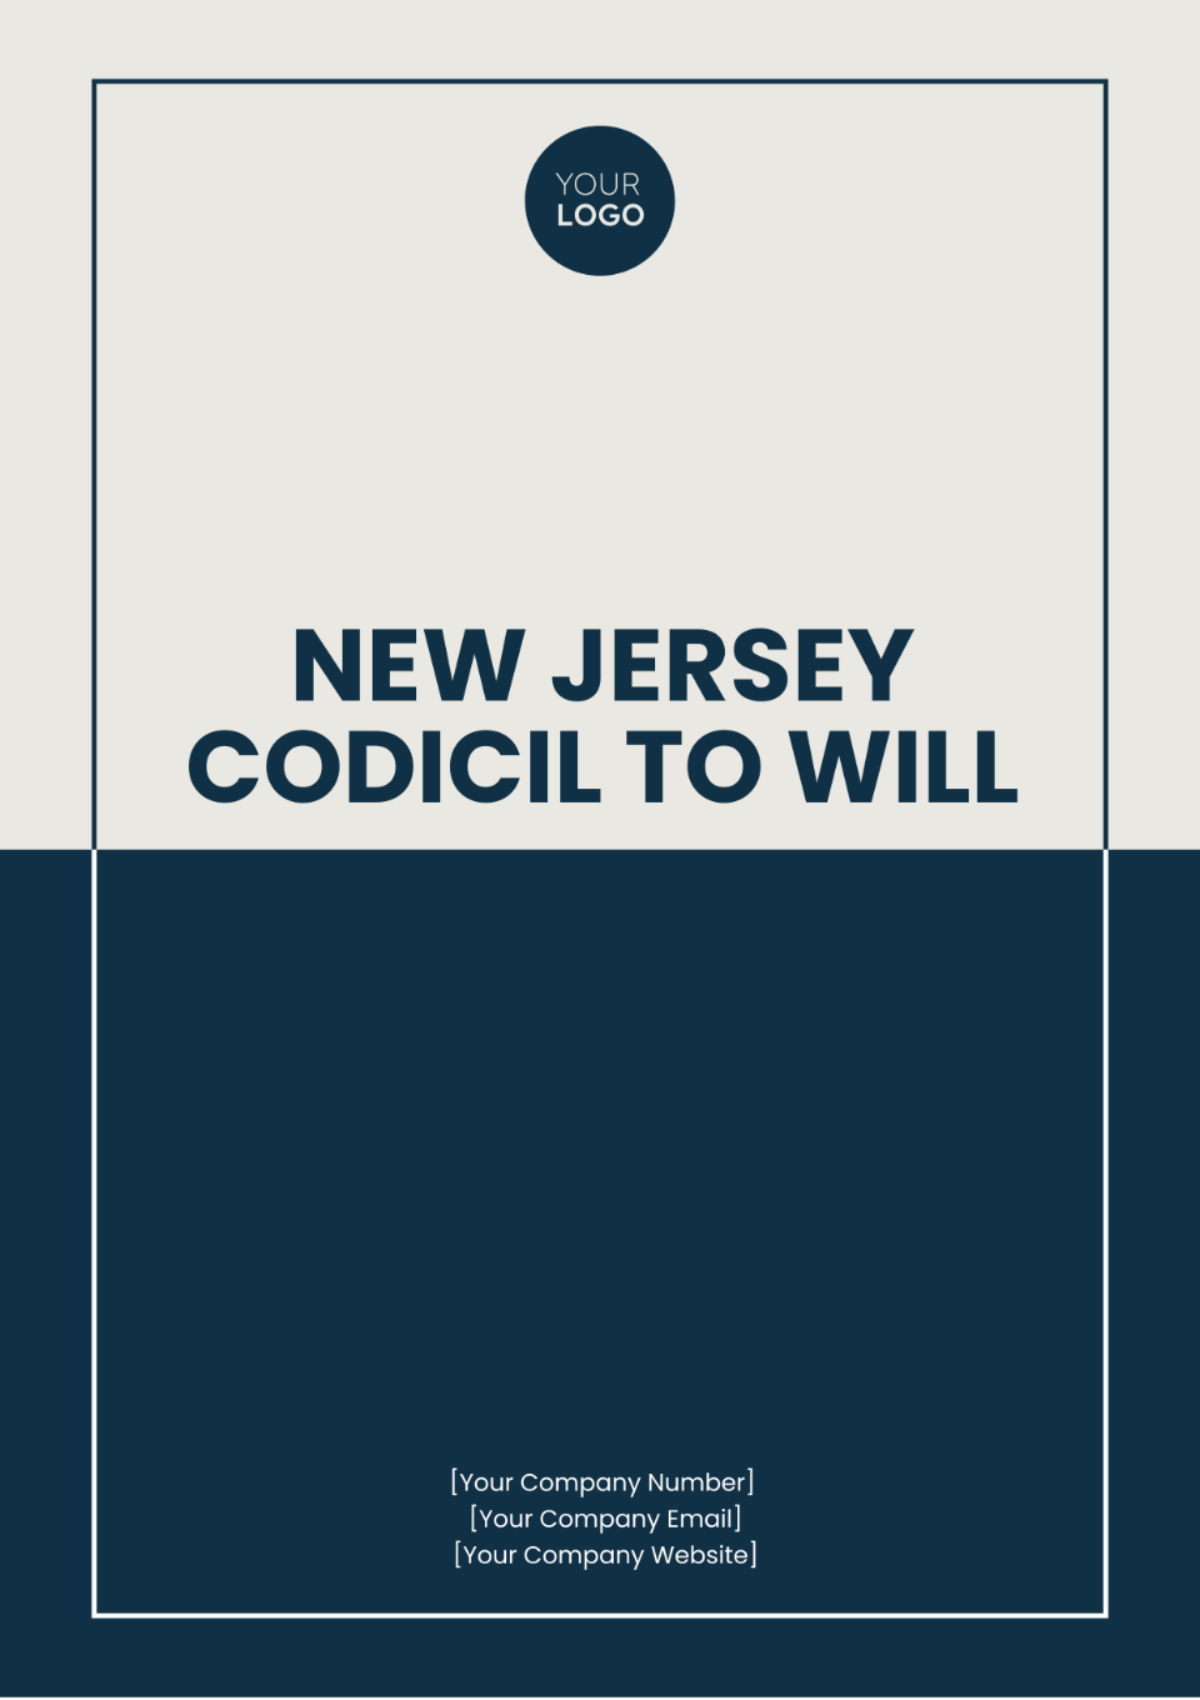 New Jersey Codicil to Will Template